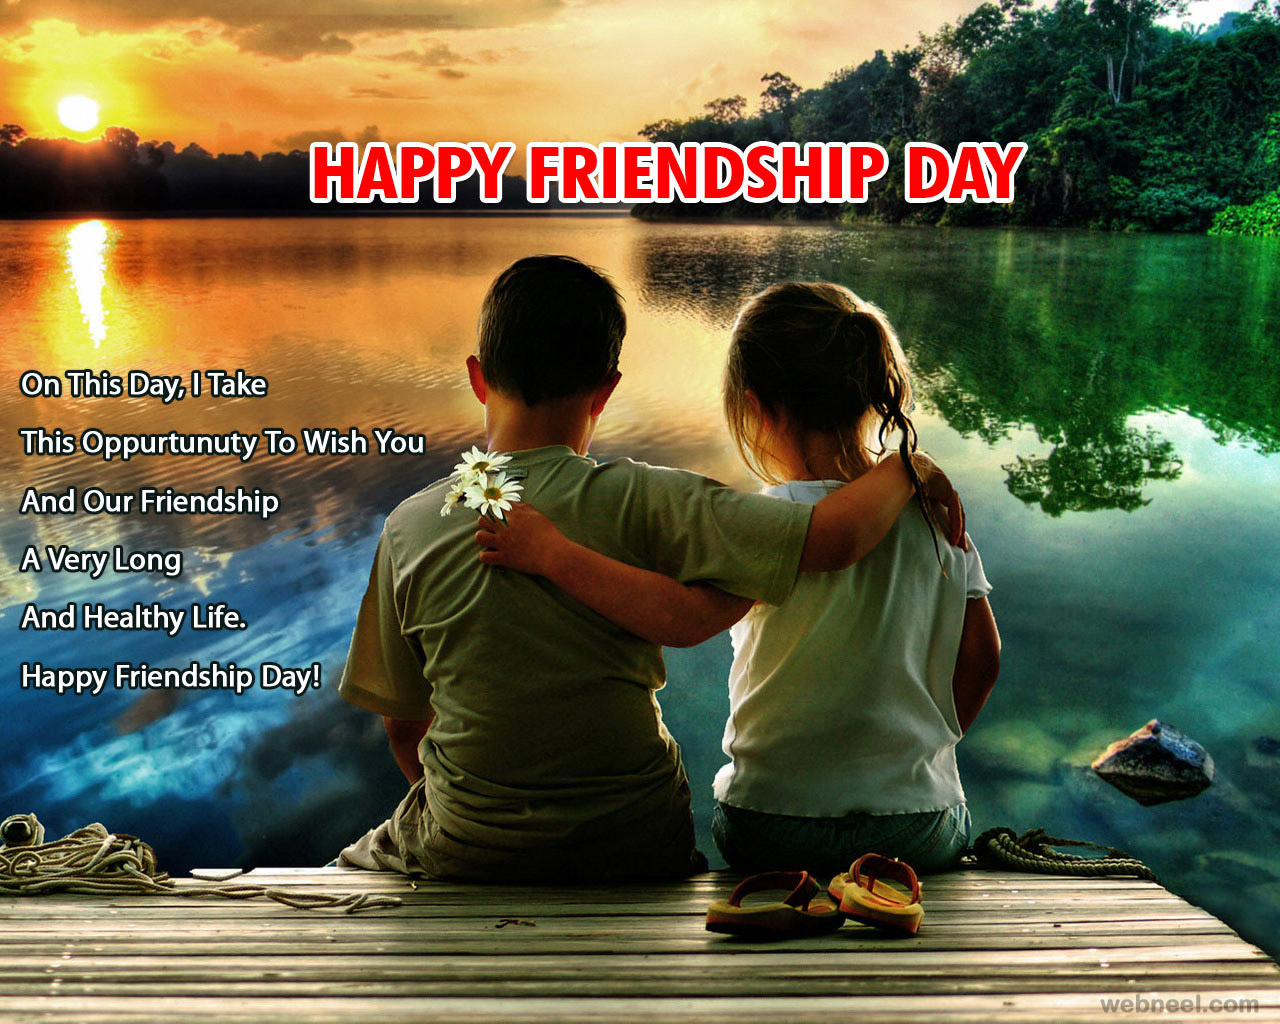 Friendship Day Greetings Wallpapers - Beautiful Quote On Friendship Day - HD Wallpaper 